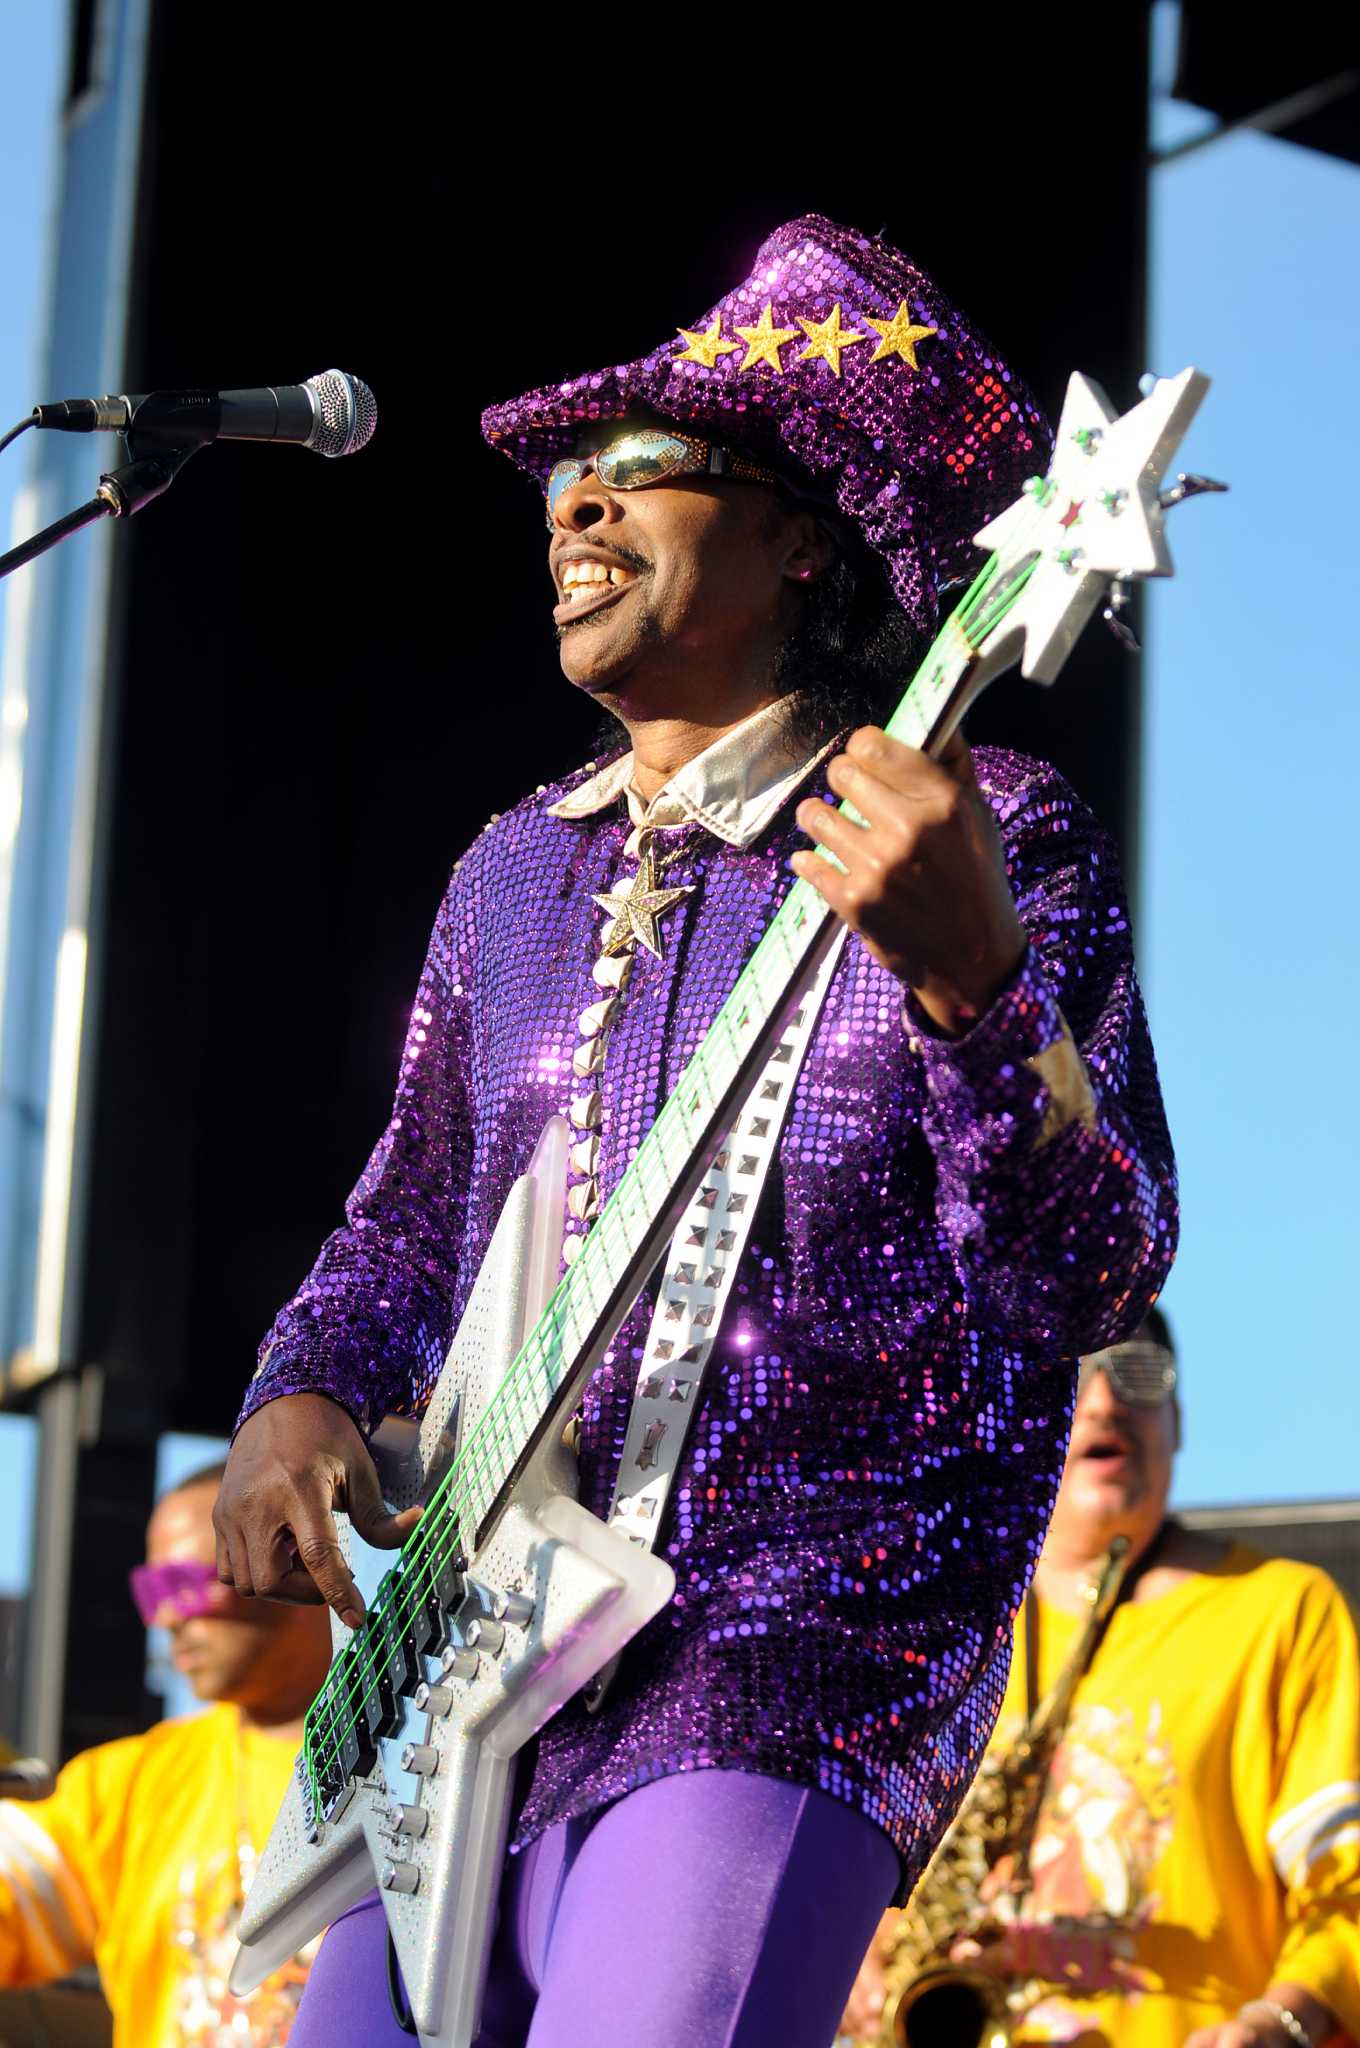 Bootsy Collins at Alive at Five - Times Union